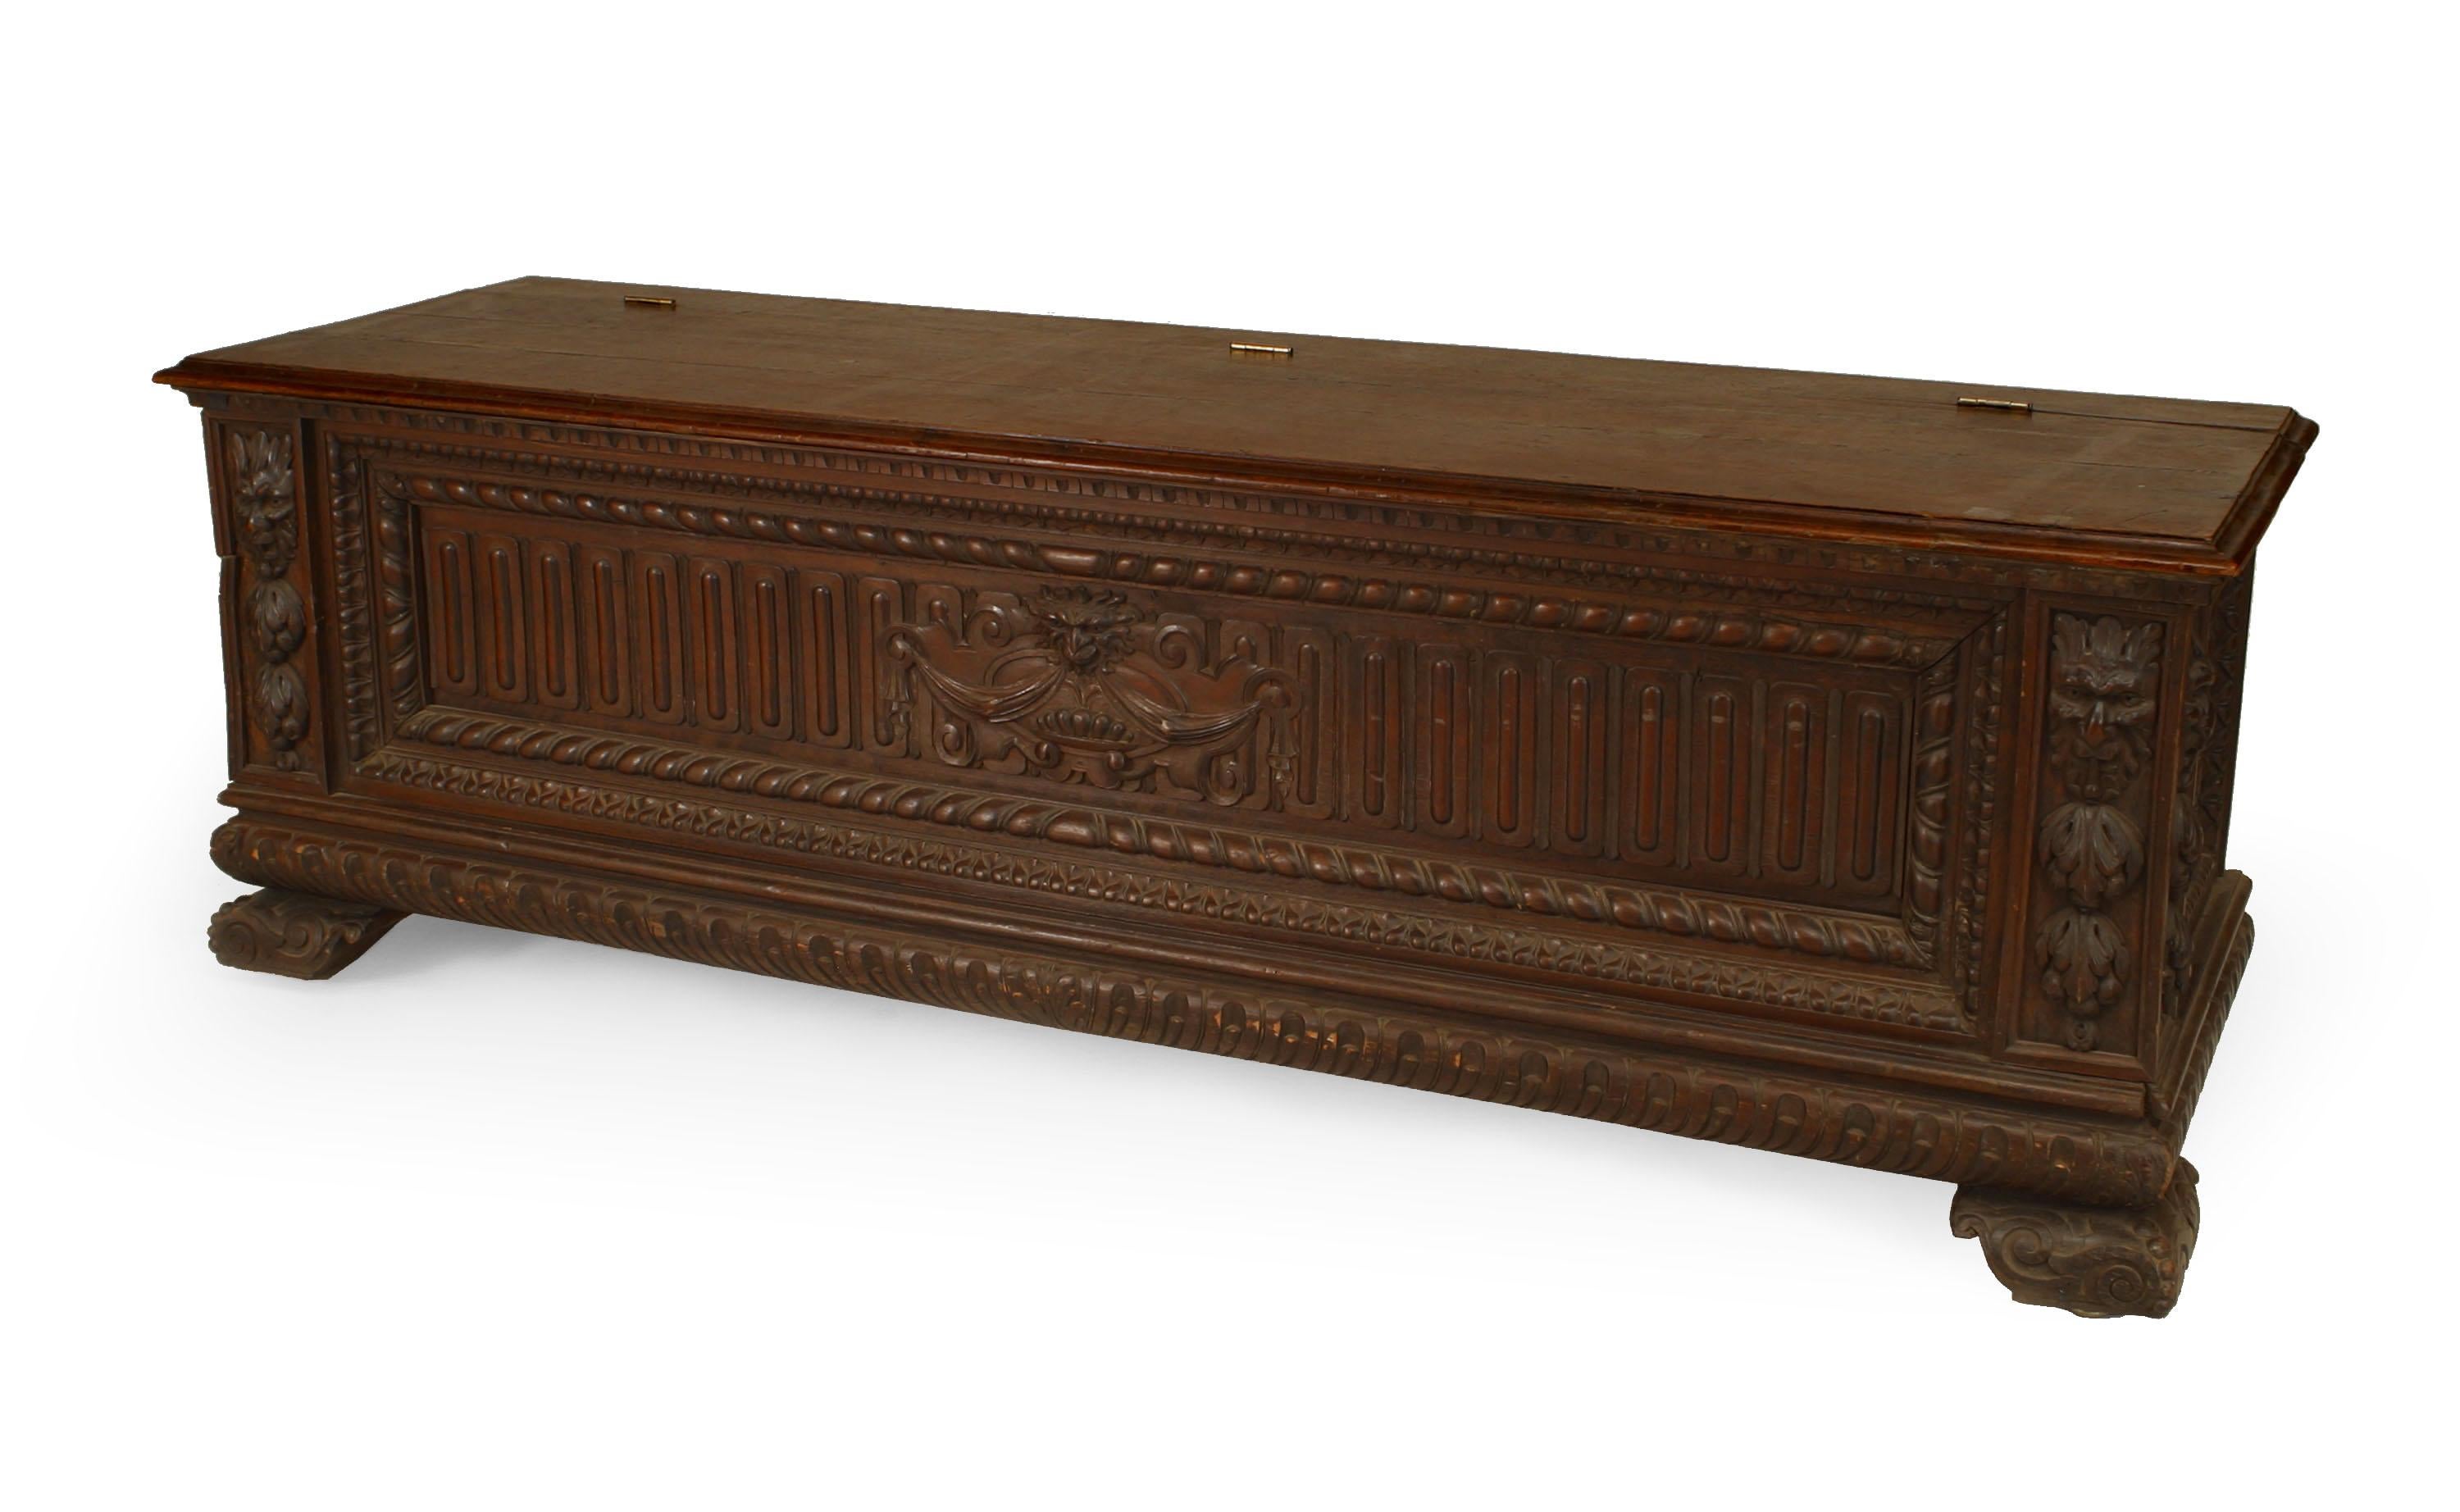 English Renaissance style (19th Cent) walnut carved cassone style floor trunk with linenfold design.